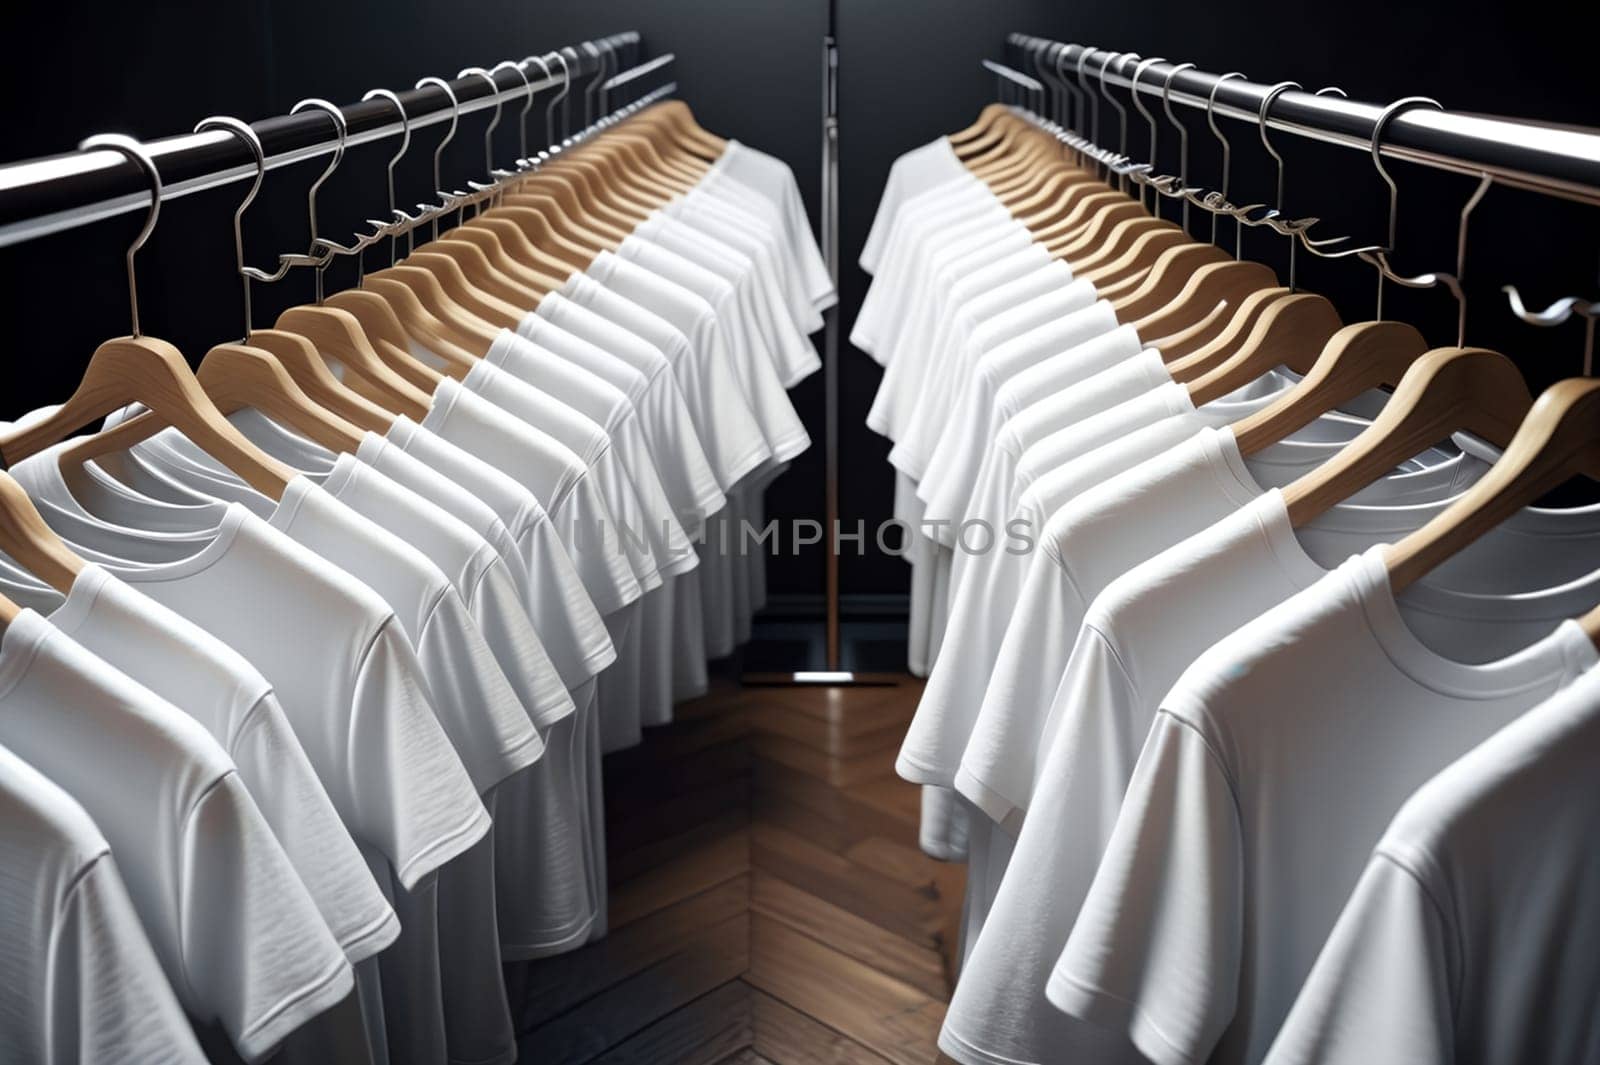 White T-shirts on hangers in a store. by Rawlik